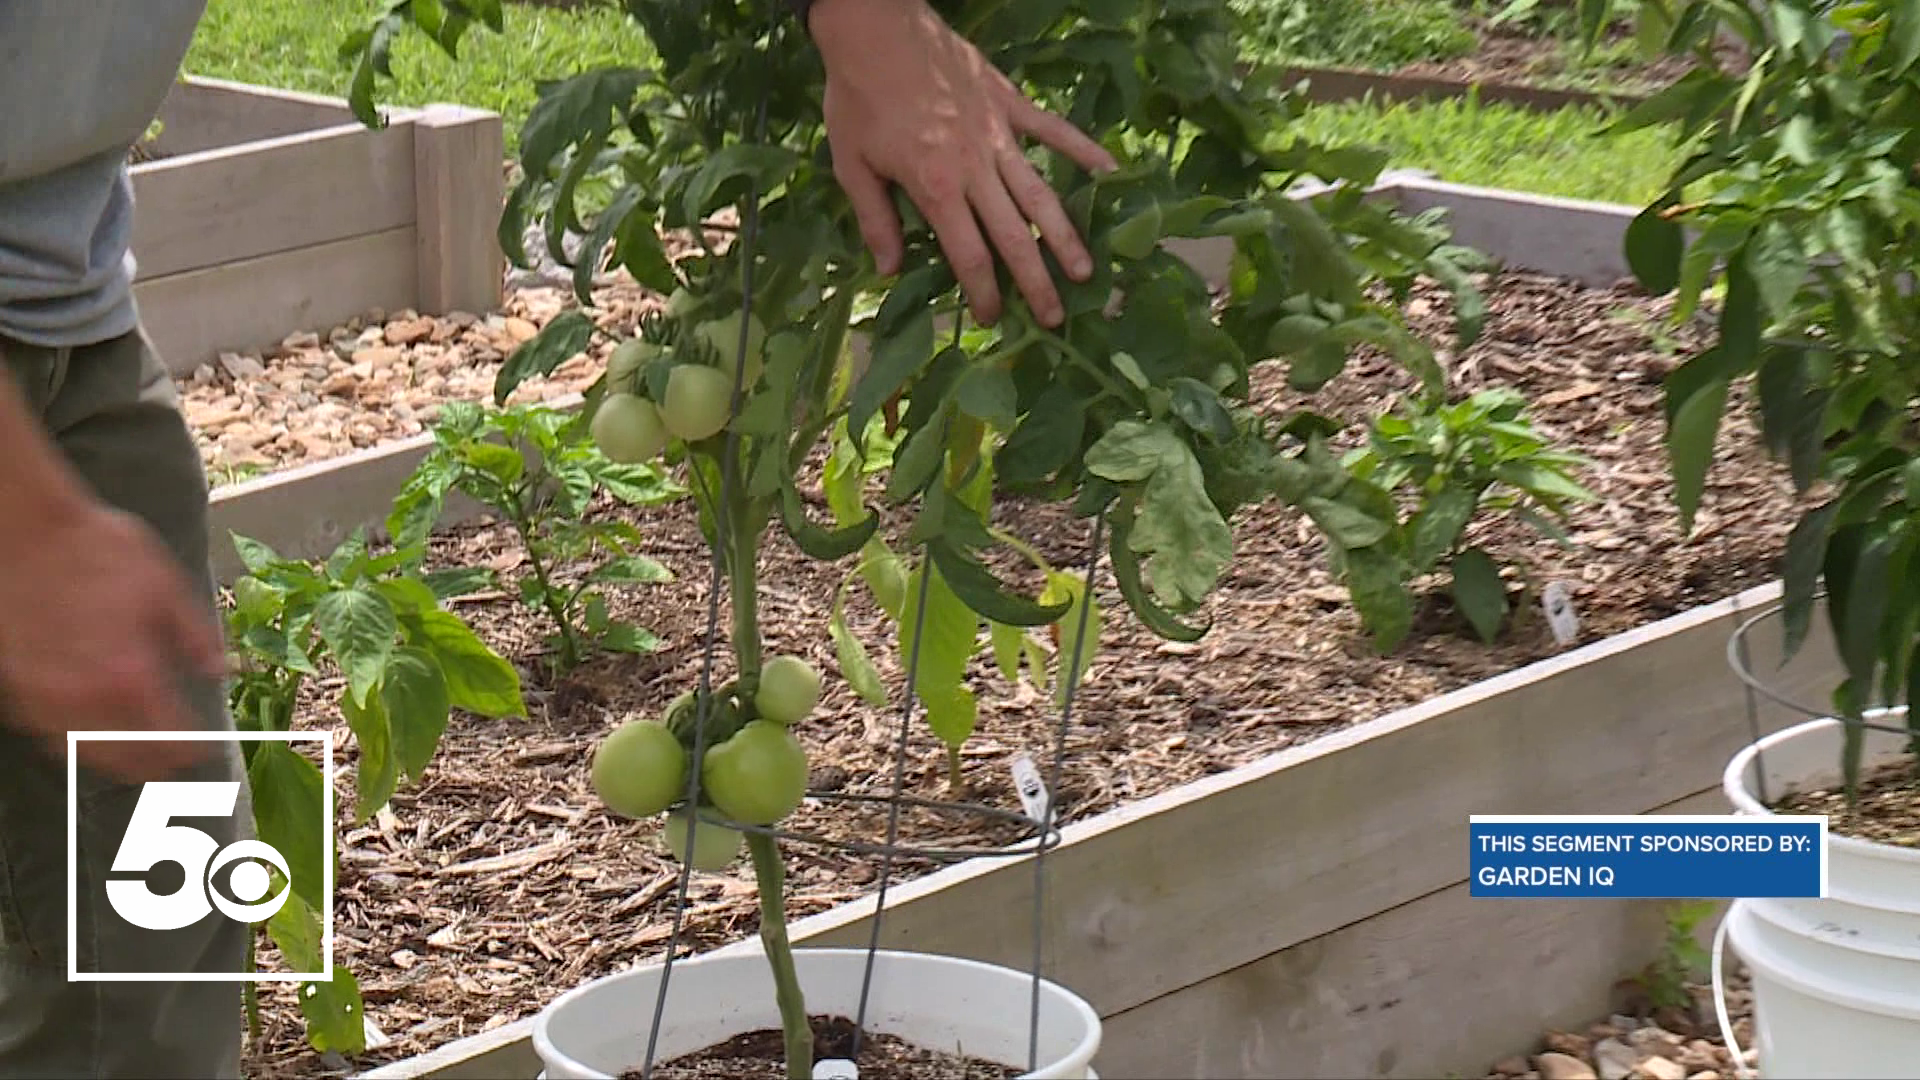 The 5NEWS Garden Club checks back in with its bucket garden in this week's segment.